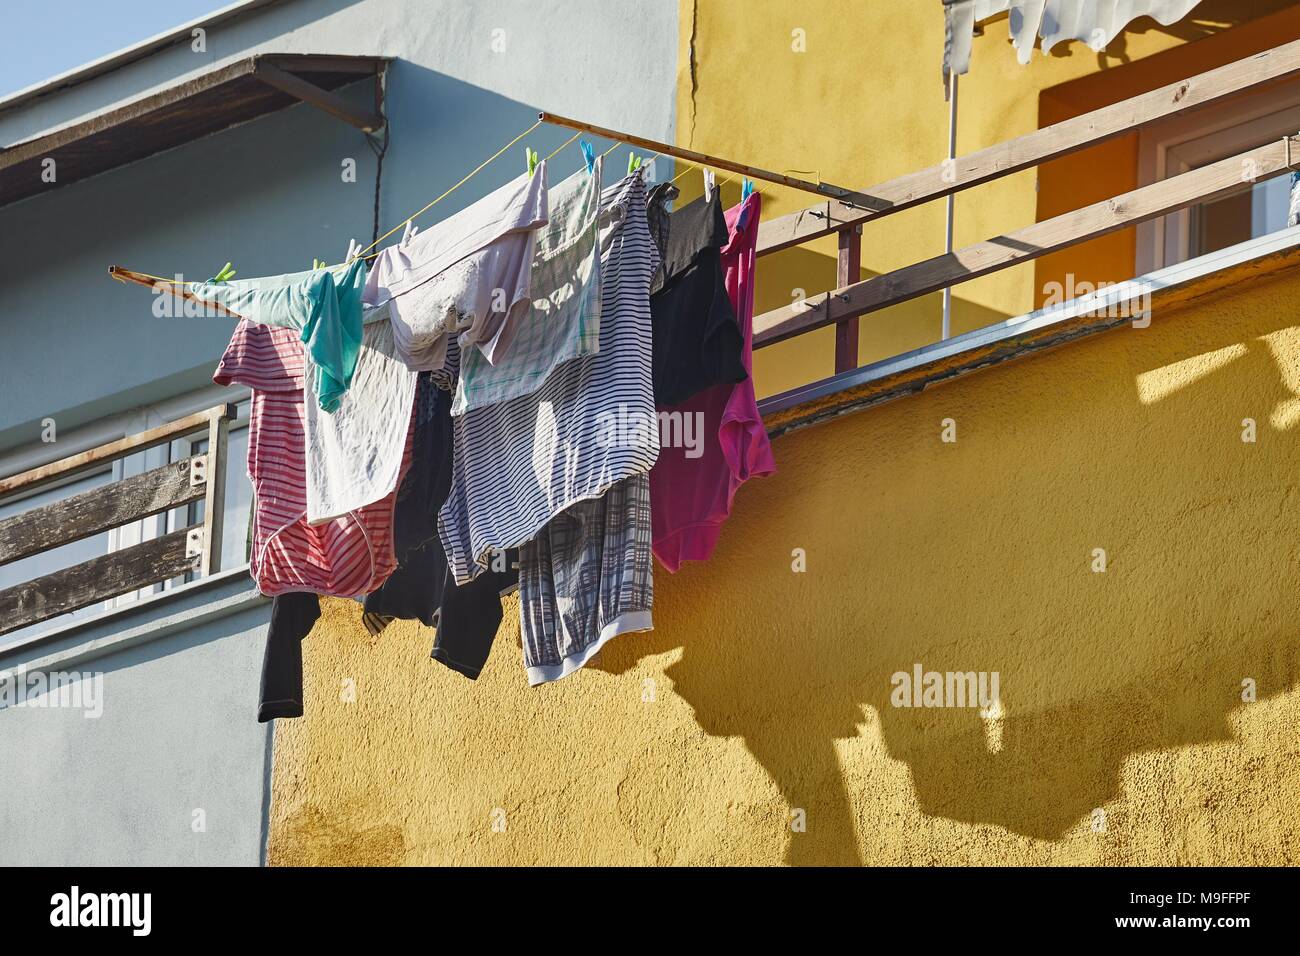 Clothes Hanging Outside Stock Photo